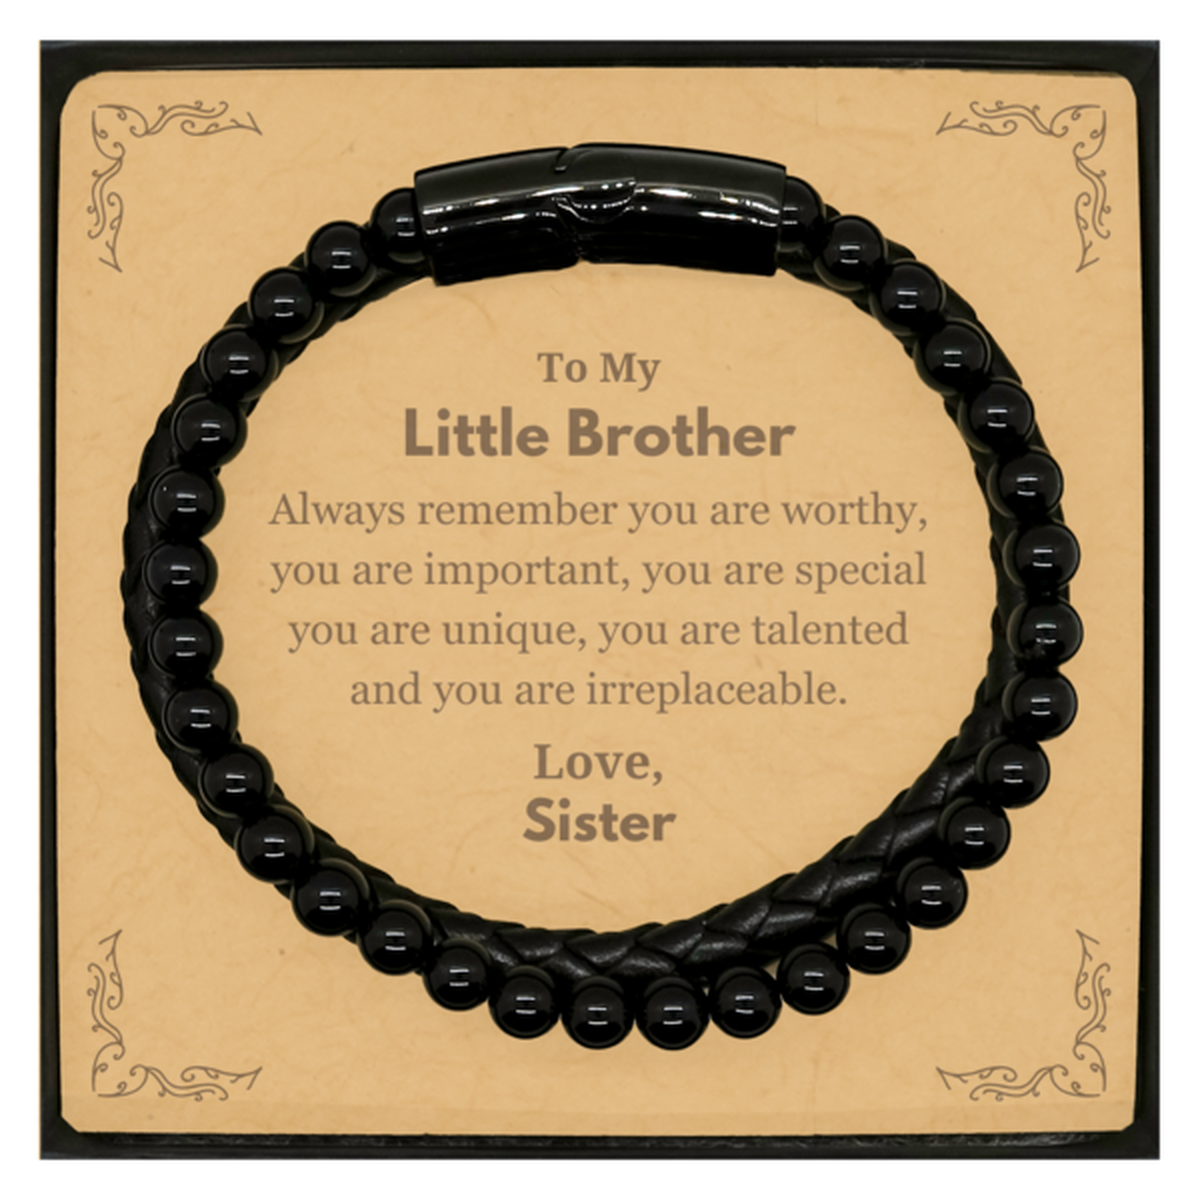 Little Brother Birthday Gifts from Sister, Inspirational Stone Leather Bracelets for Little Brother Christmas Graduation Gifts for Little Brother Always remember you are worthy, you are important. Love, Sister